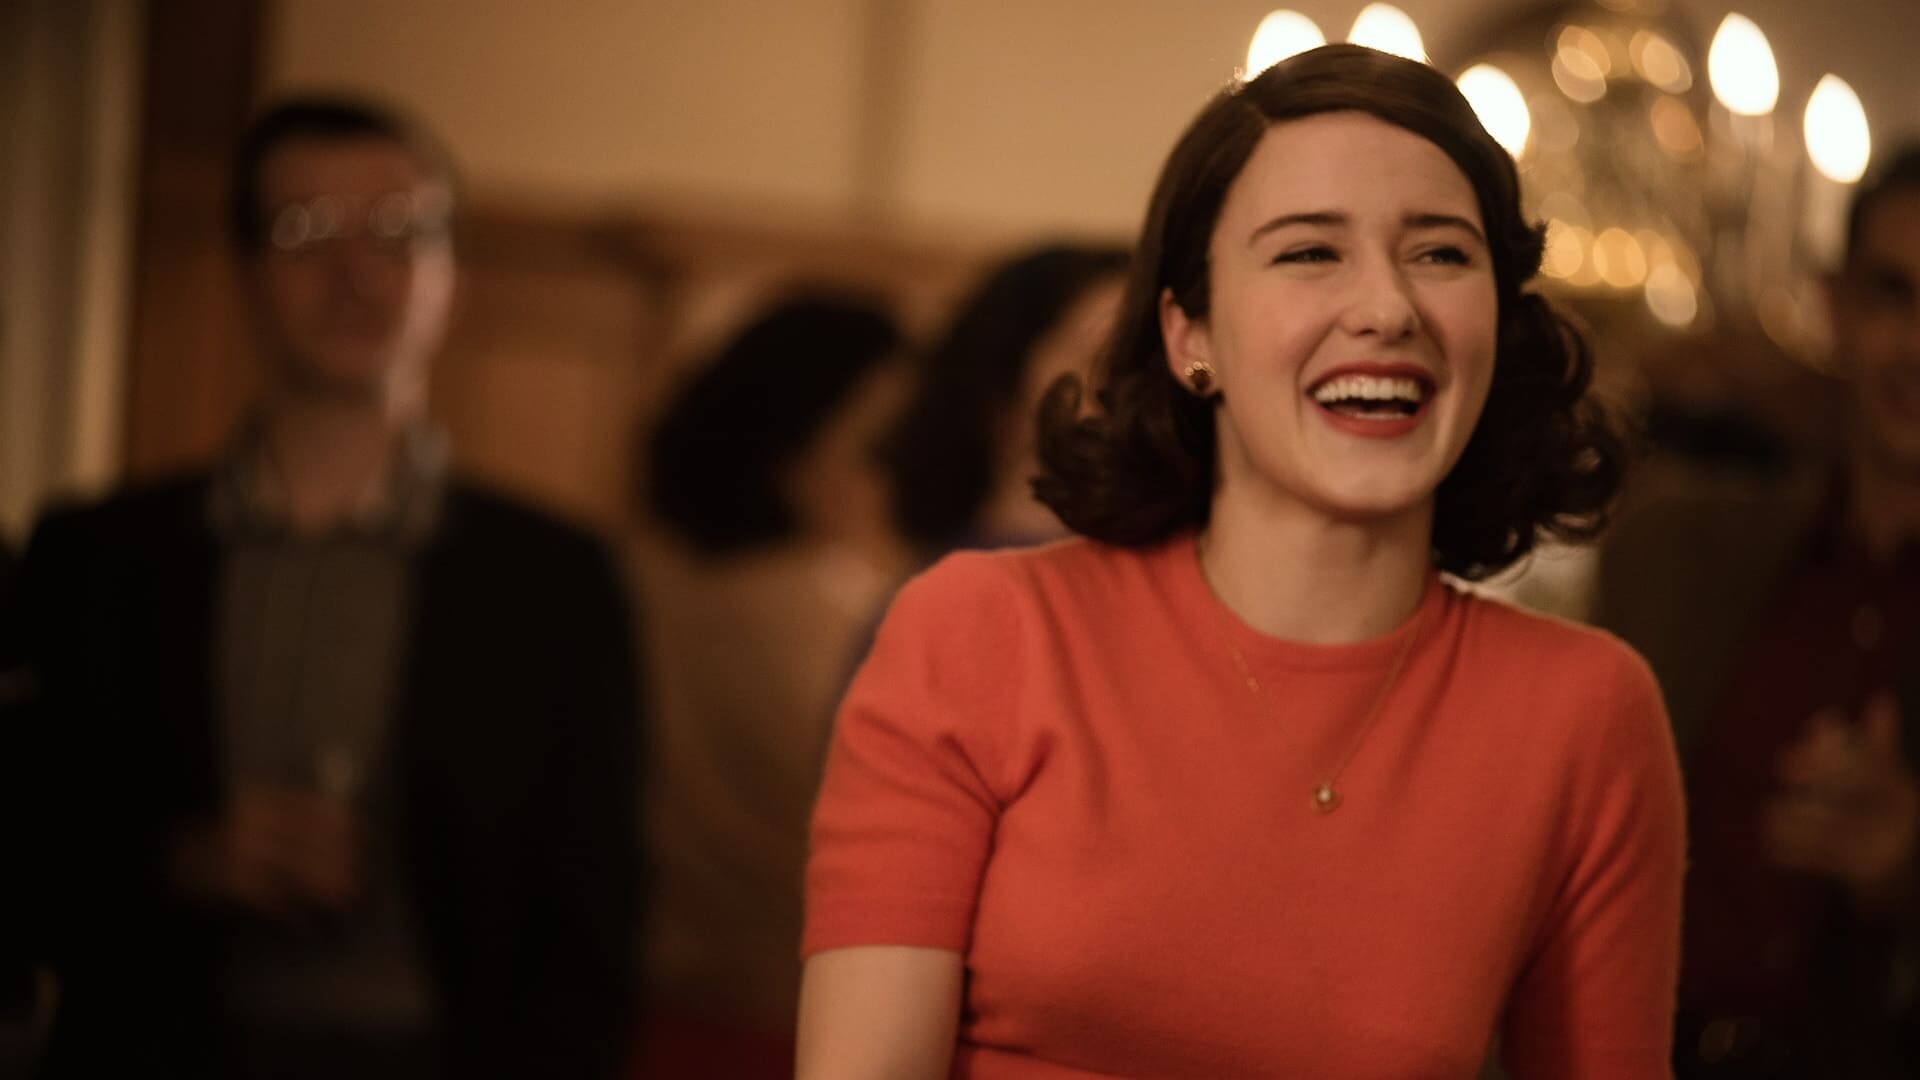 The Marvelous Mrs. Maisel: The series was renewed for a third season on May 20, 2018, before the second season had aired. 1920x1080 Full HD Wallpaper.